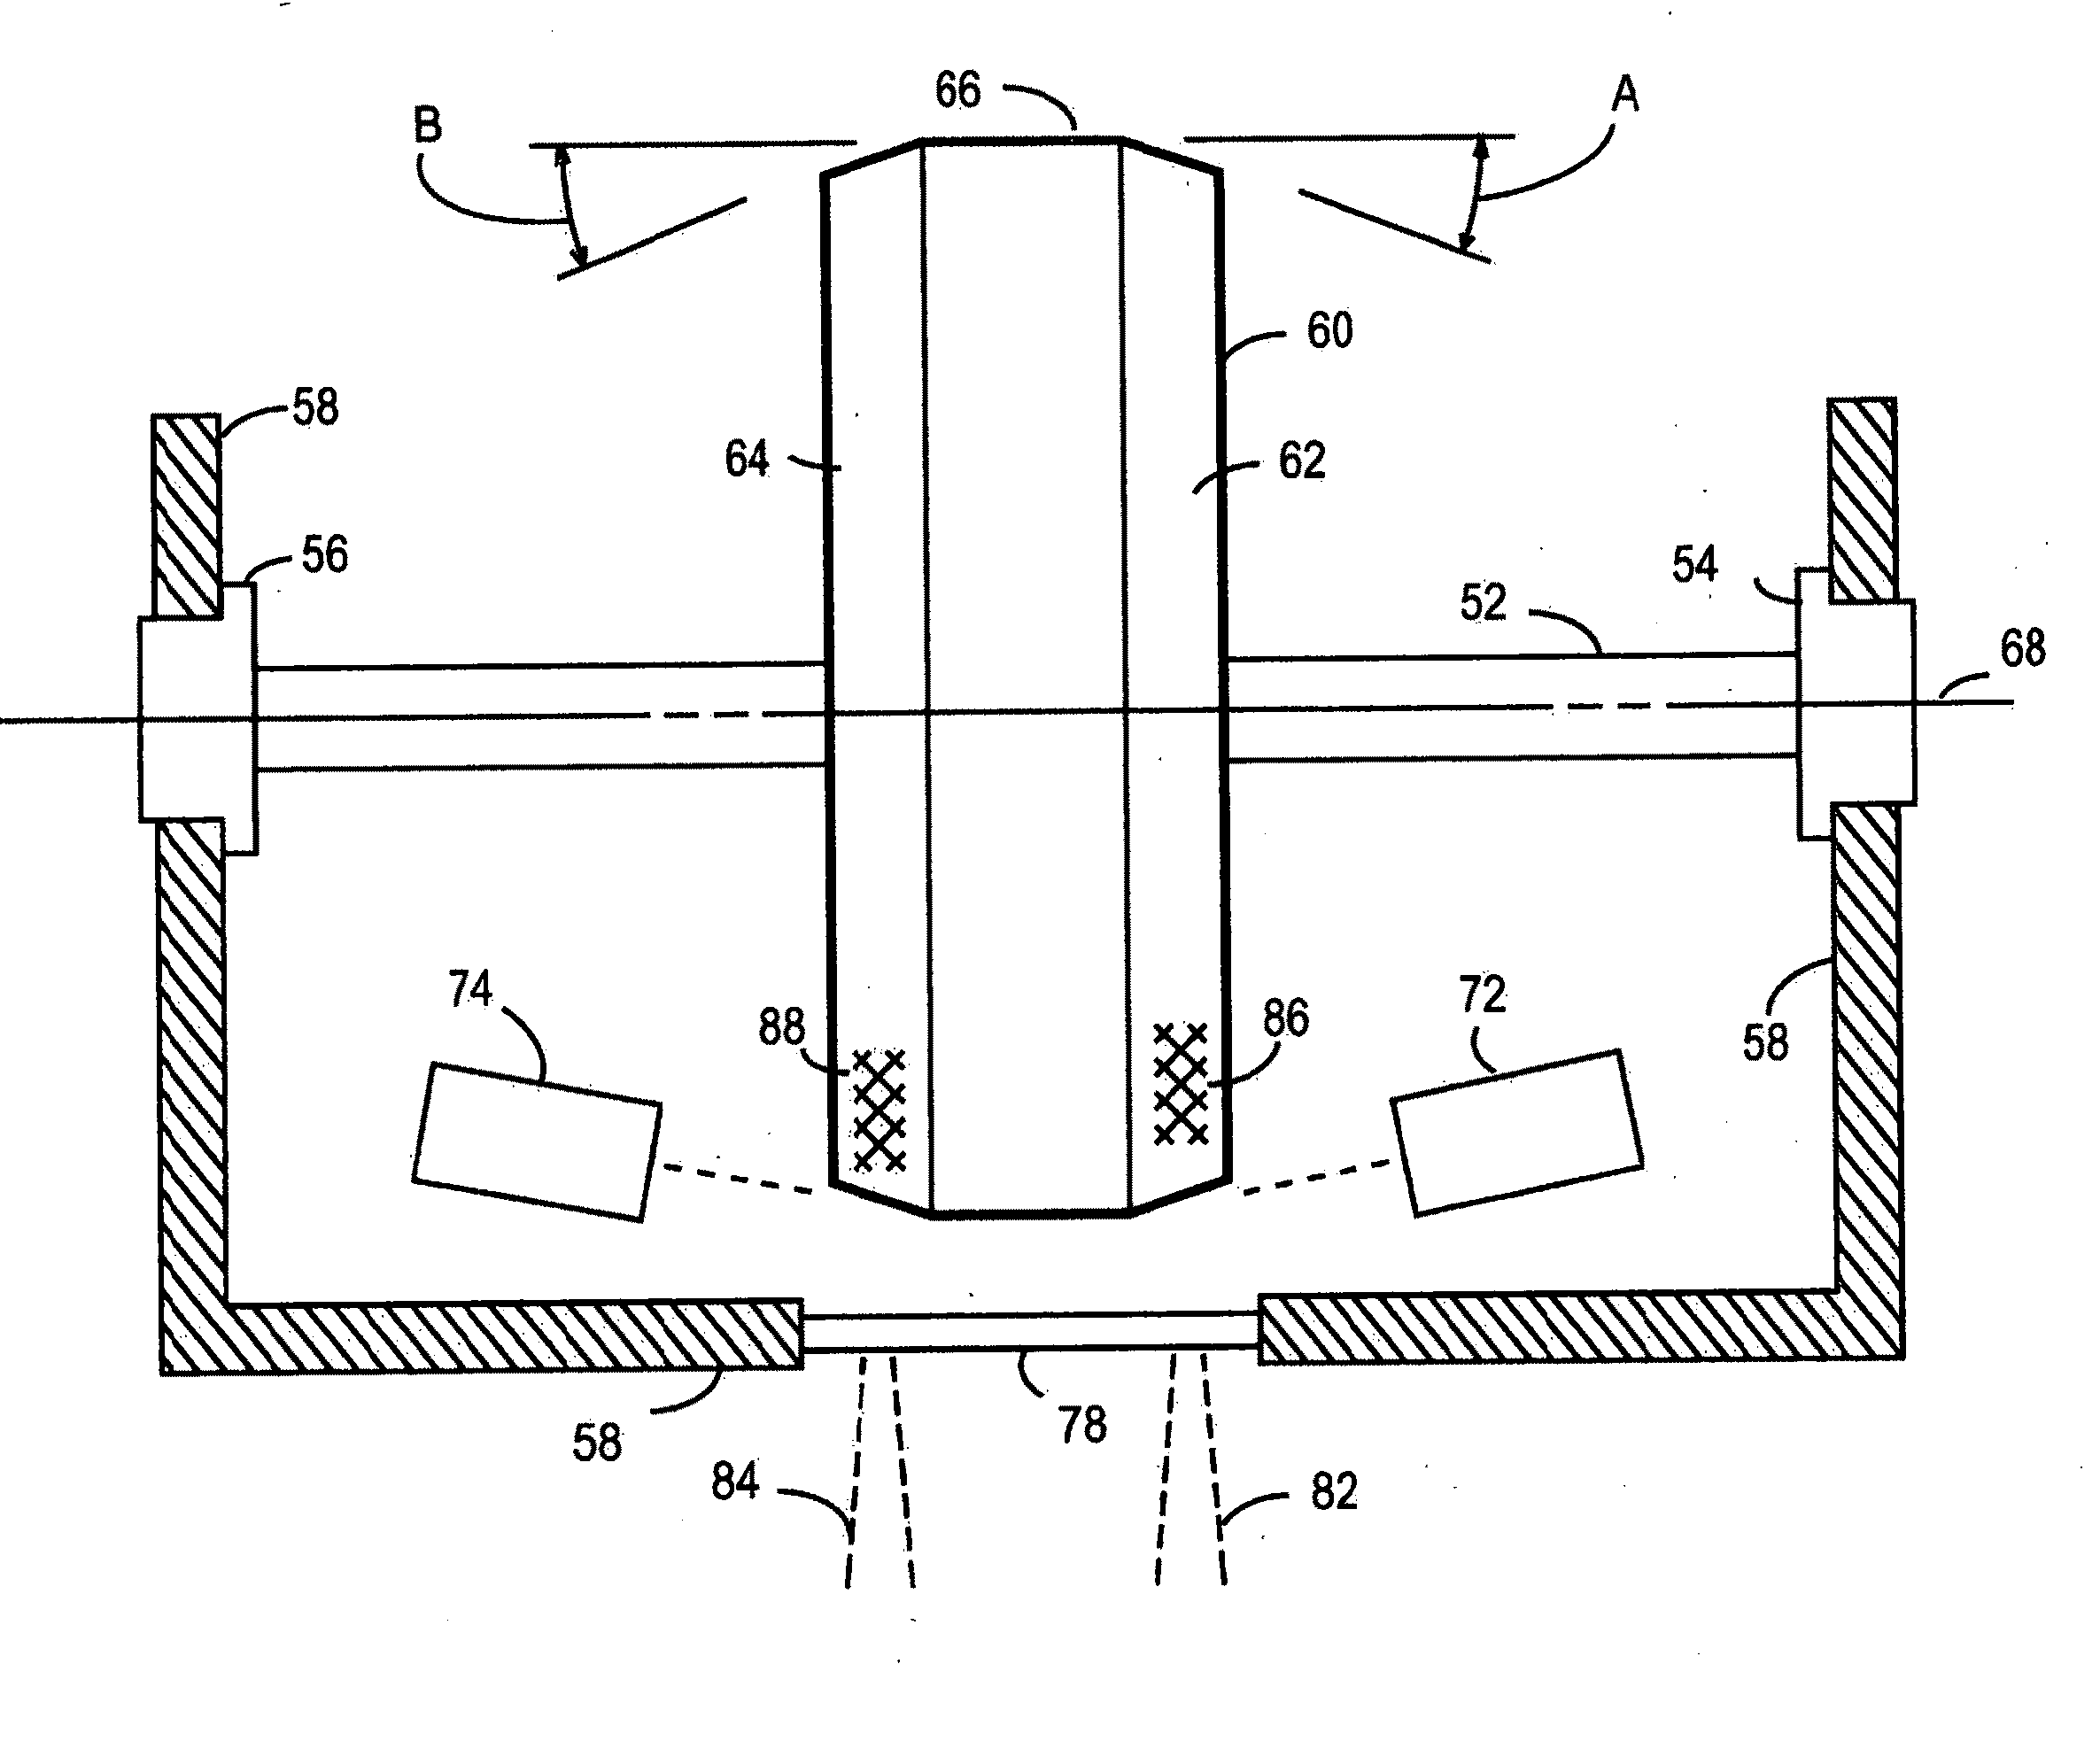 Wide-coverage x-ray source with dual-sided target